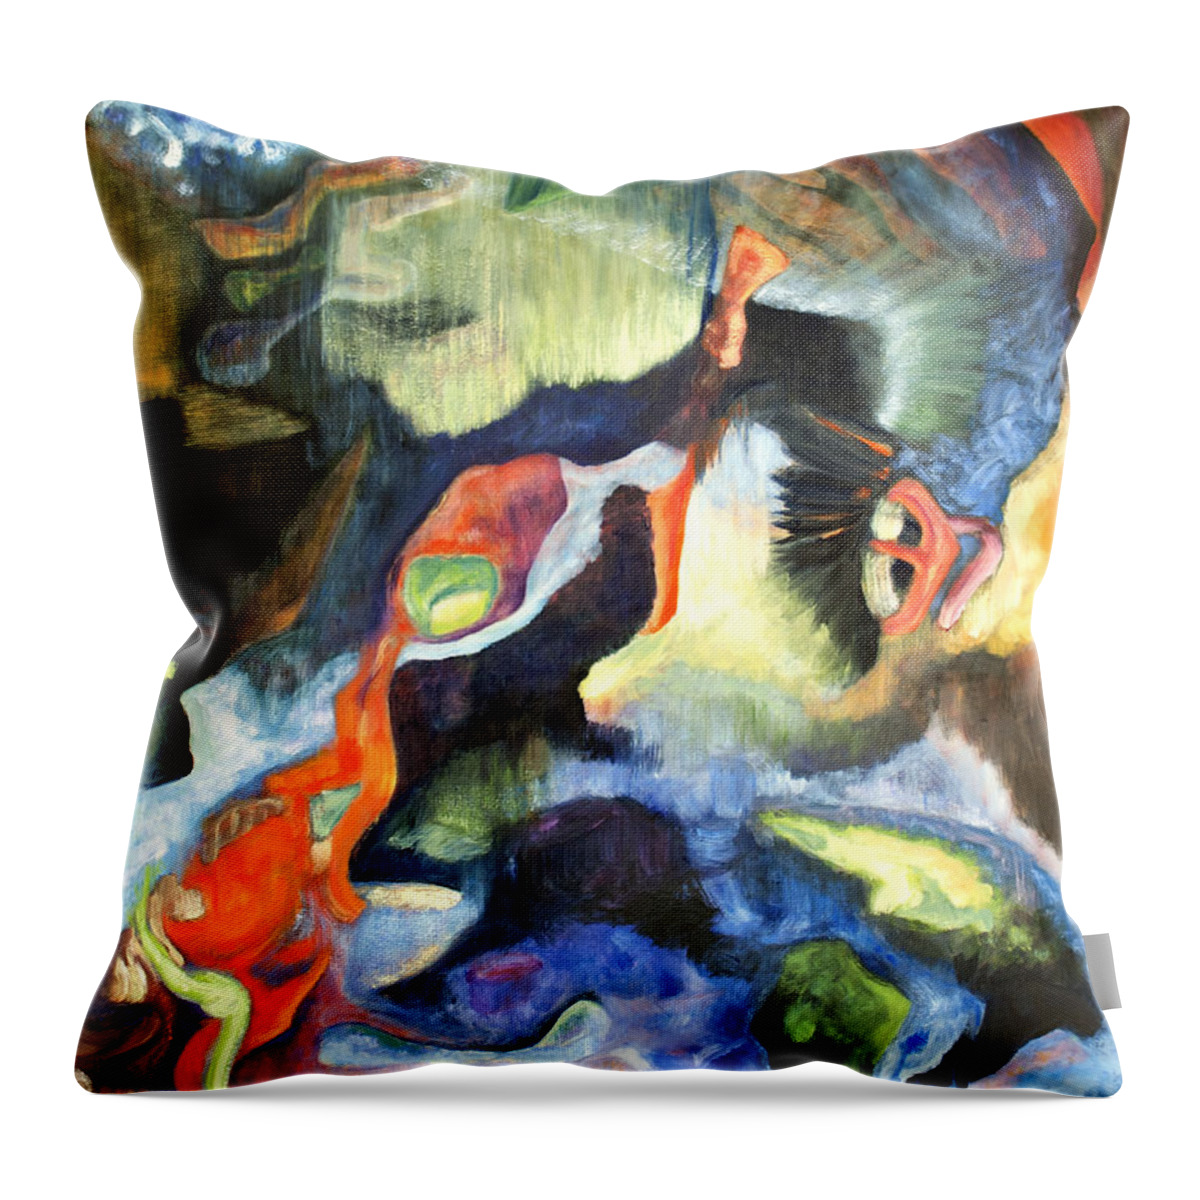 Abstract Throw Pillow featuring the painting 01313 Big Bang by AnneKarin Glass